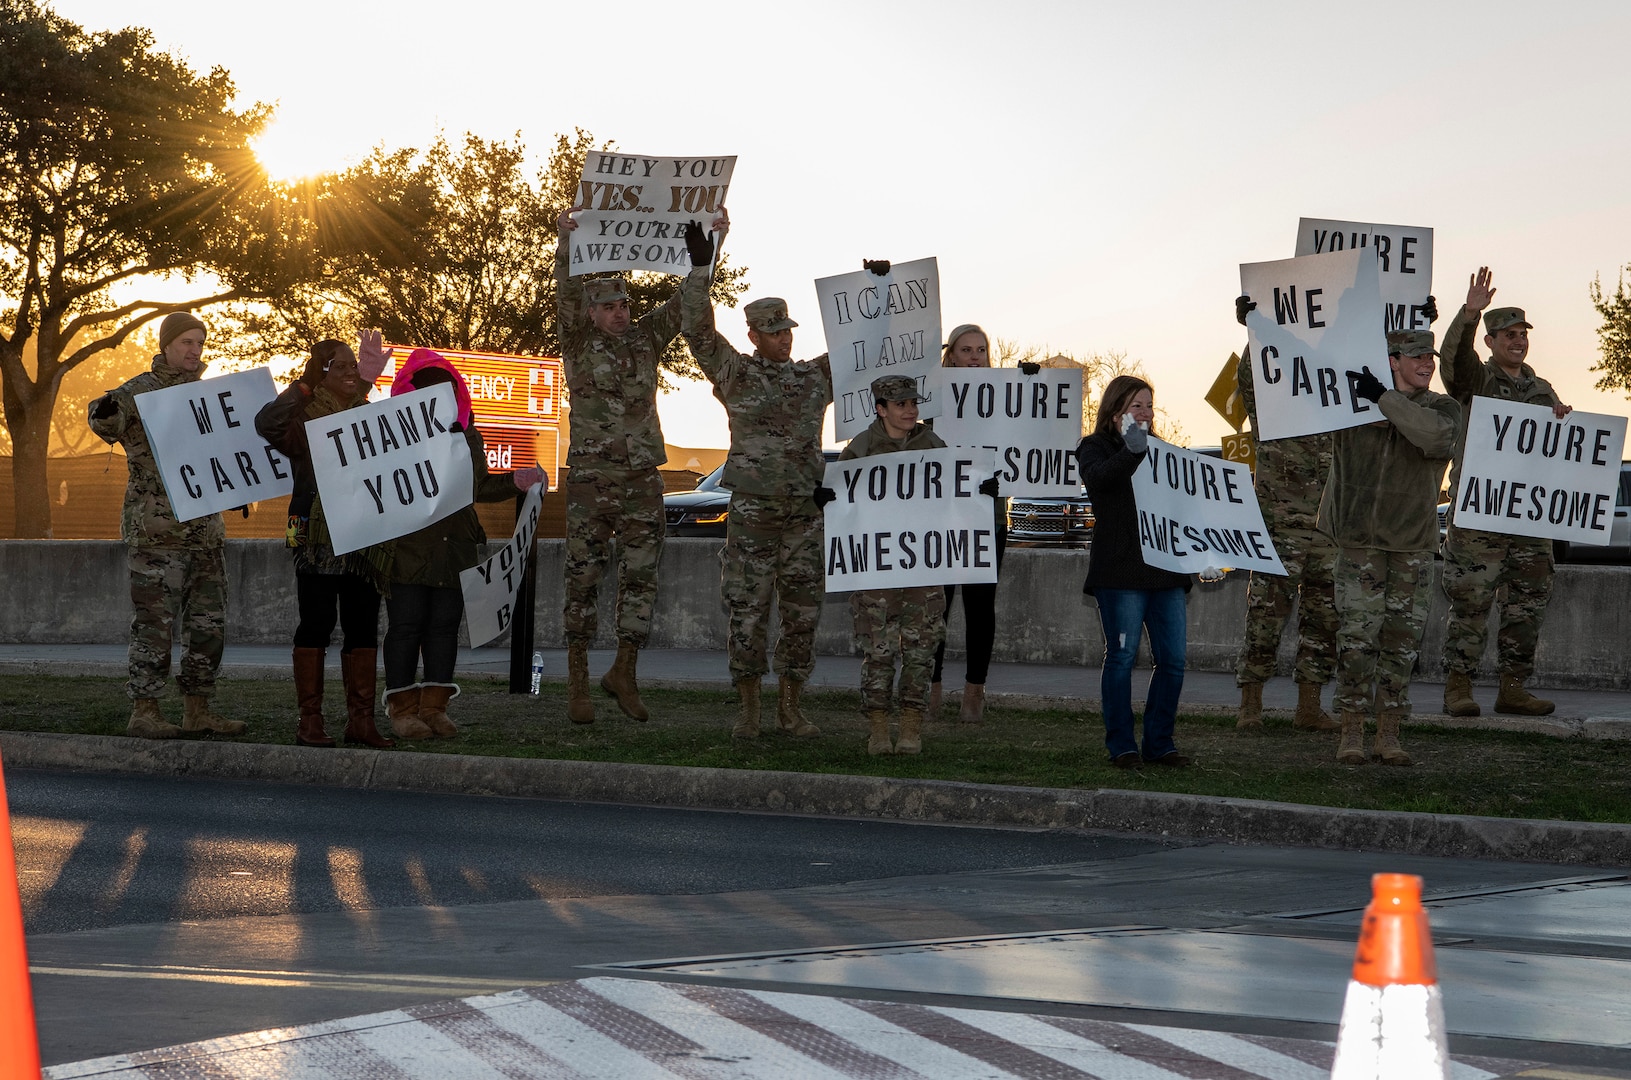 37th Training Wing military and civilian members hold positive messages of support at base gates during the morning inbound commute as part of their new initiative, “We Care,” at Joint Base San Antonio-Lackland, Texas, Dec. 18, 2019. The initiative involved 37th Training Wing military and civilian members spending the morning at various gates letting each person know that they stand together in support of those struggling with depression and thoughts of suicide by holding a positive message of support and handing out over 400 candy canes. If you are struggling with thoughts of suicide, please go directly to the Mental Health Clinic or to your closest Emergency Room. You can also reach the National Suicide Prevention Lifeline at 1-800-273-8255.